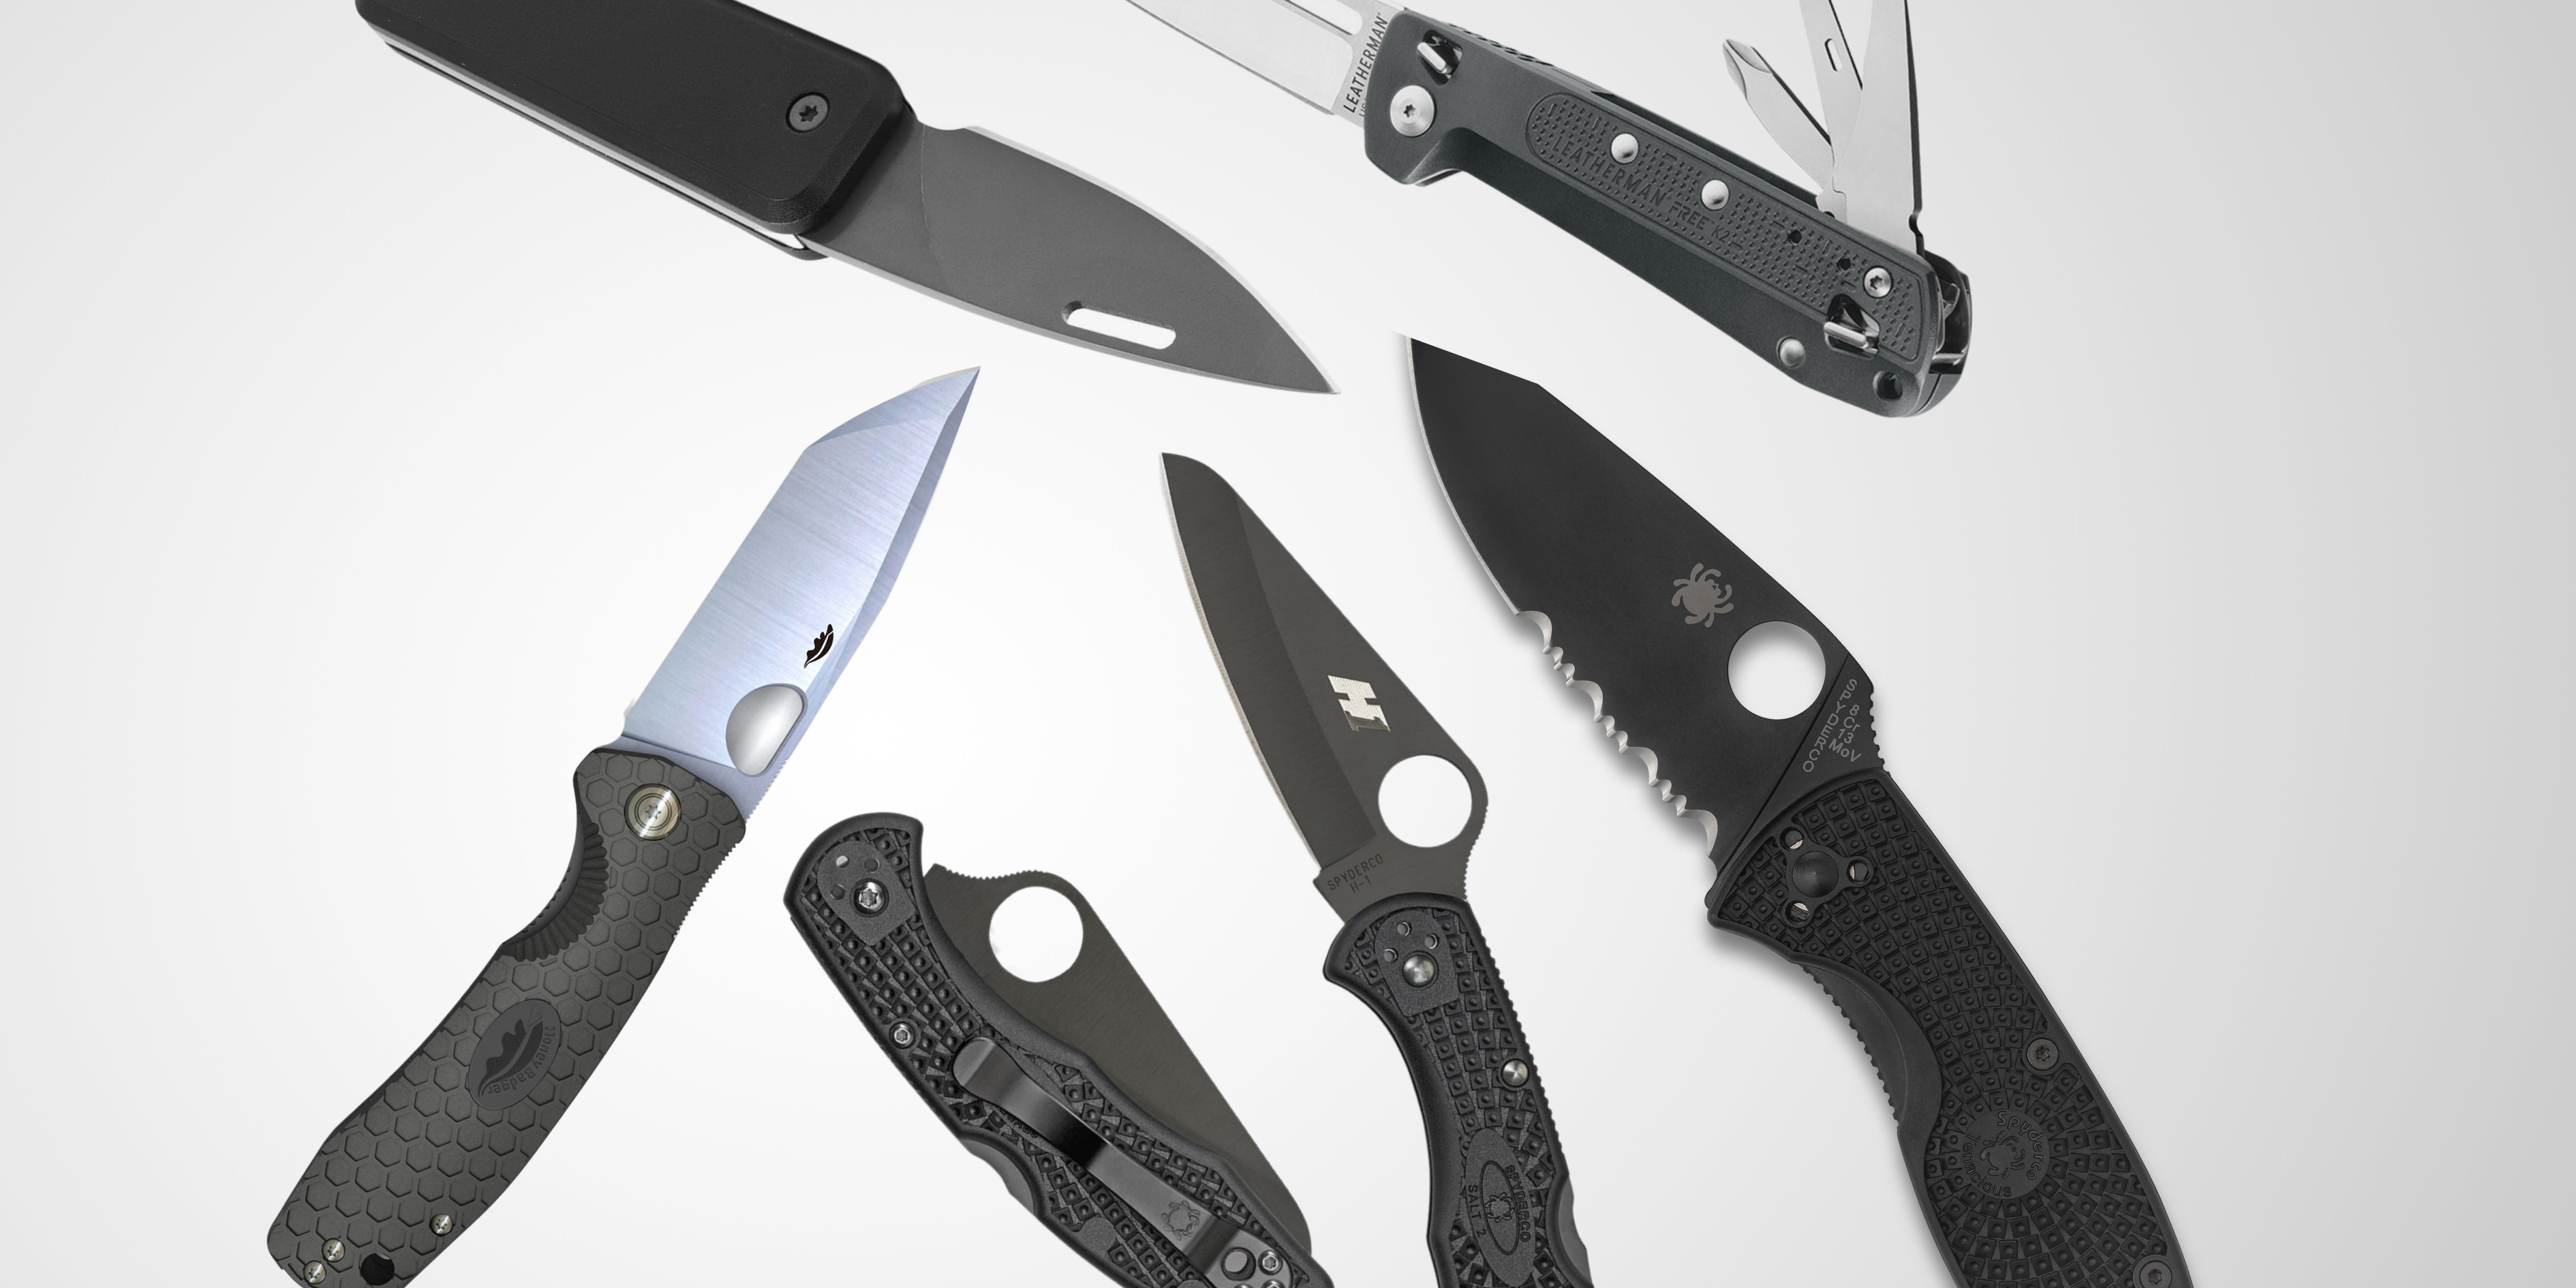 Everyday Carry: The Urban Pocket Knives